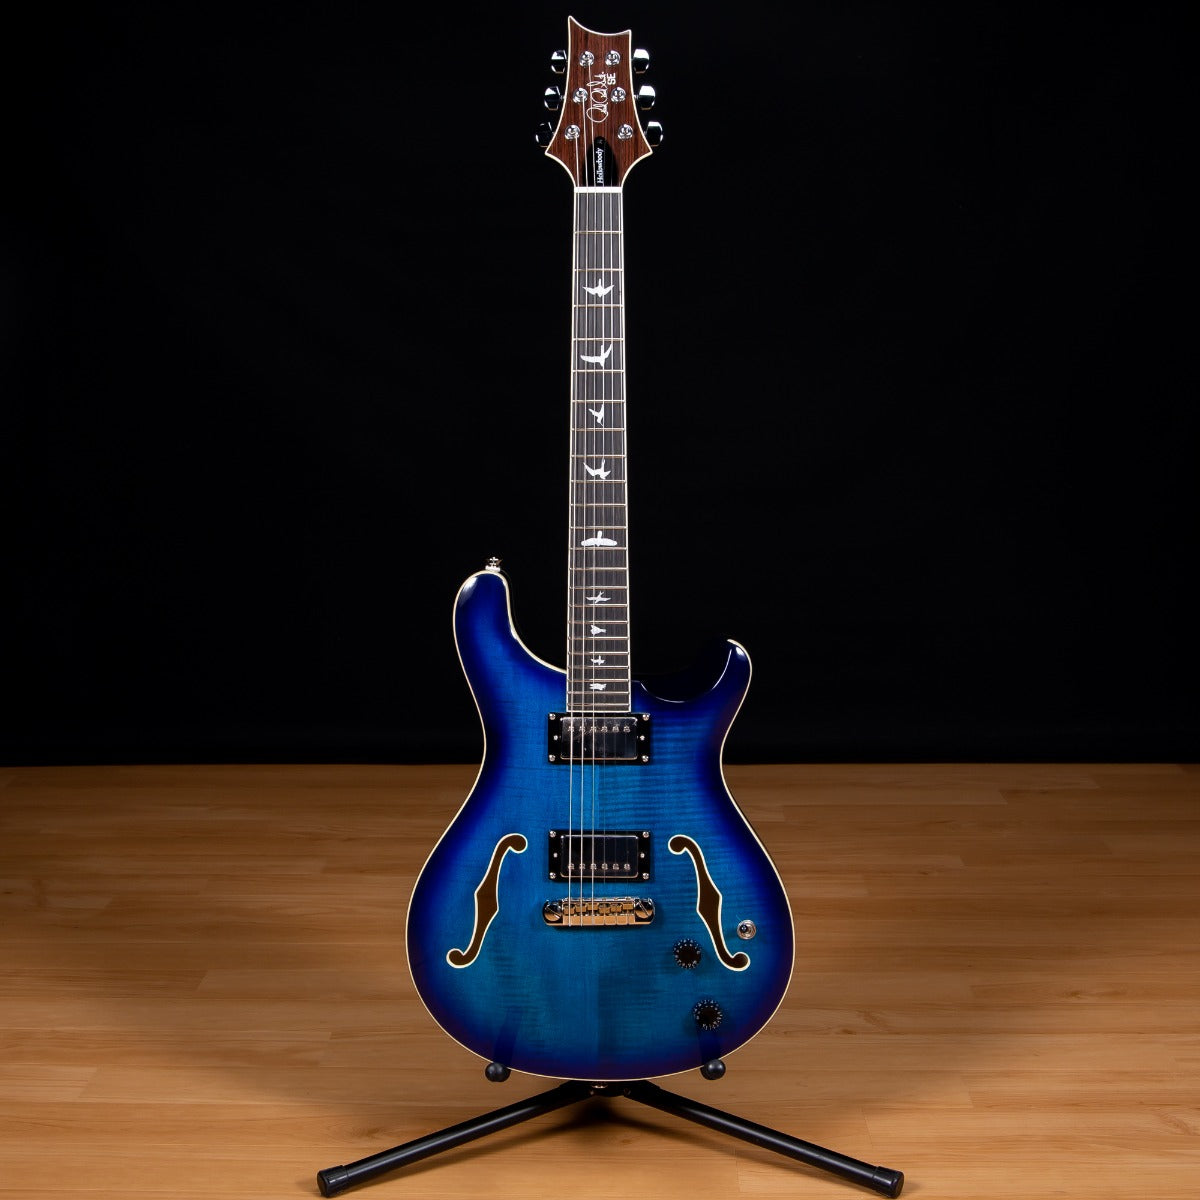 PRS SE Hollowbody II Electric Guitar - Faded Blue Burst view 2